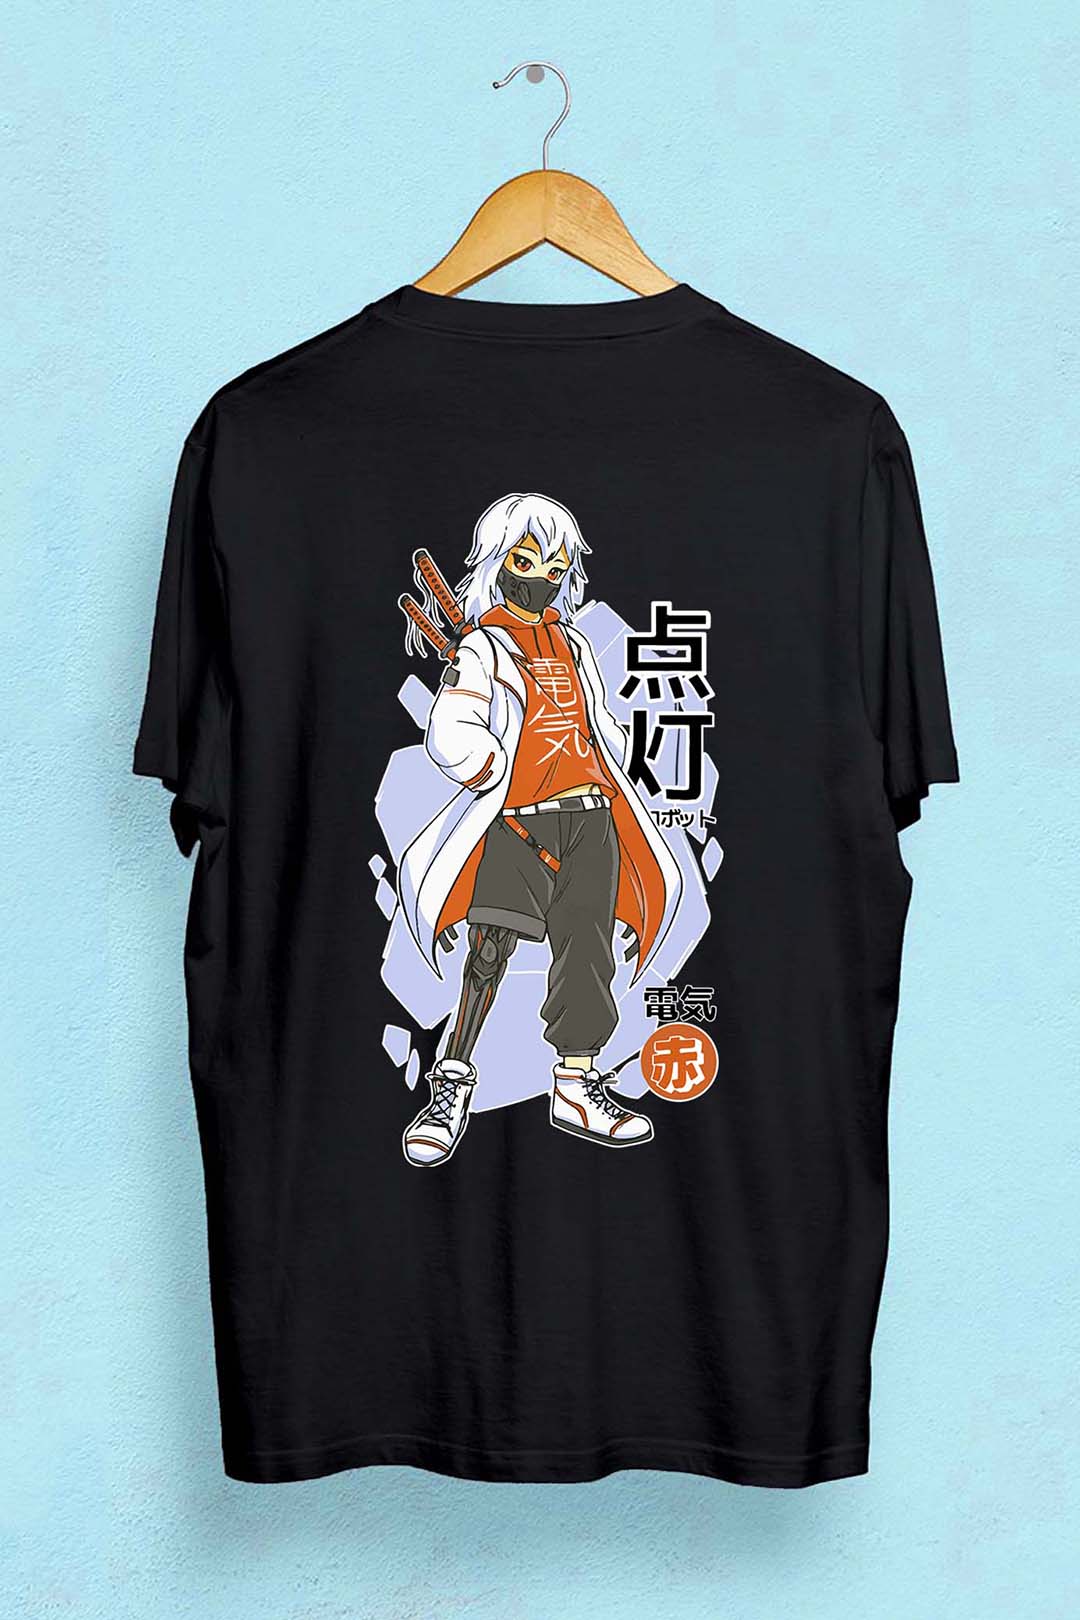 Unique Anime Character Design T-Shirts to Elevate Your Style - MasterBundles